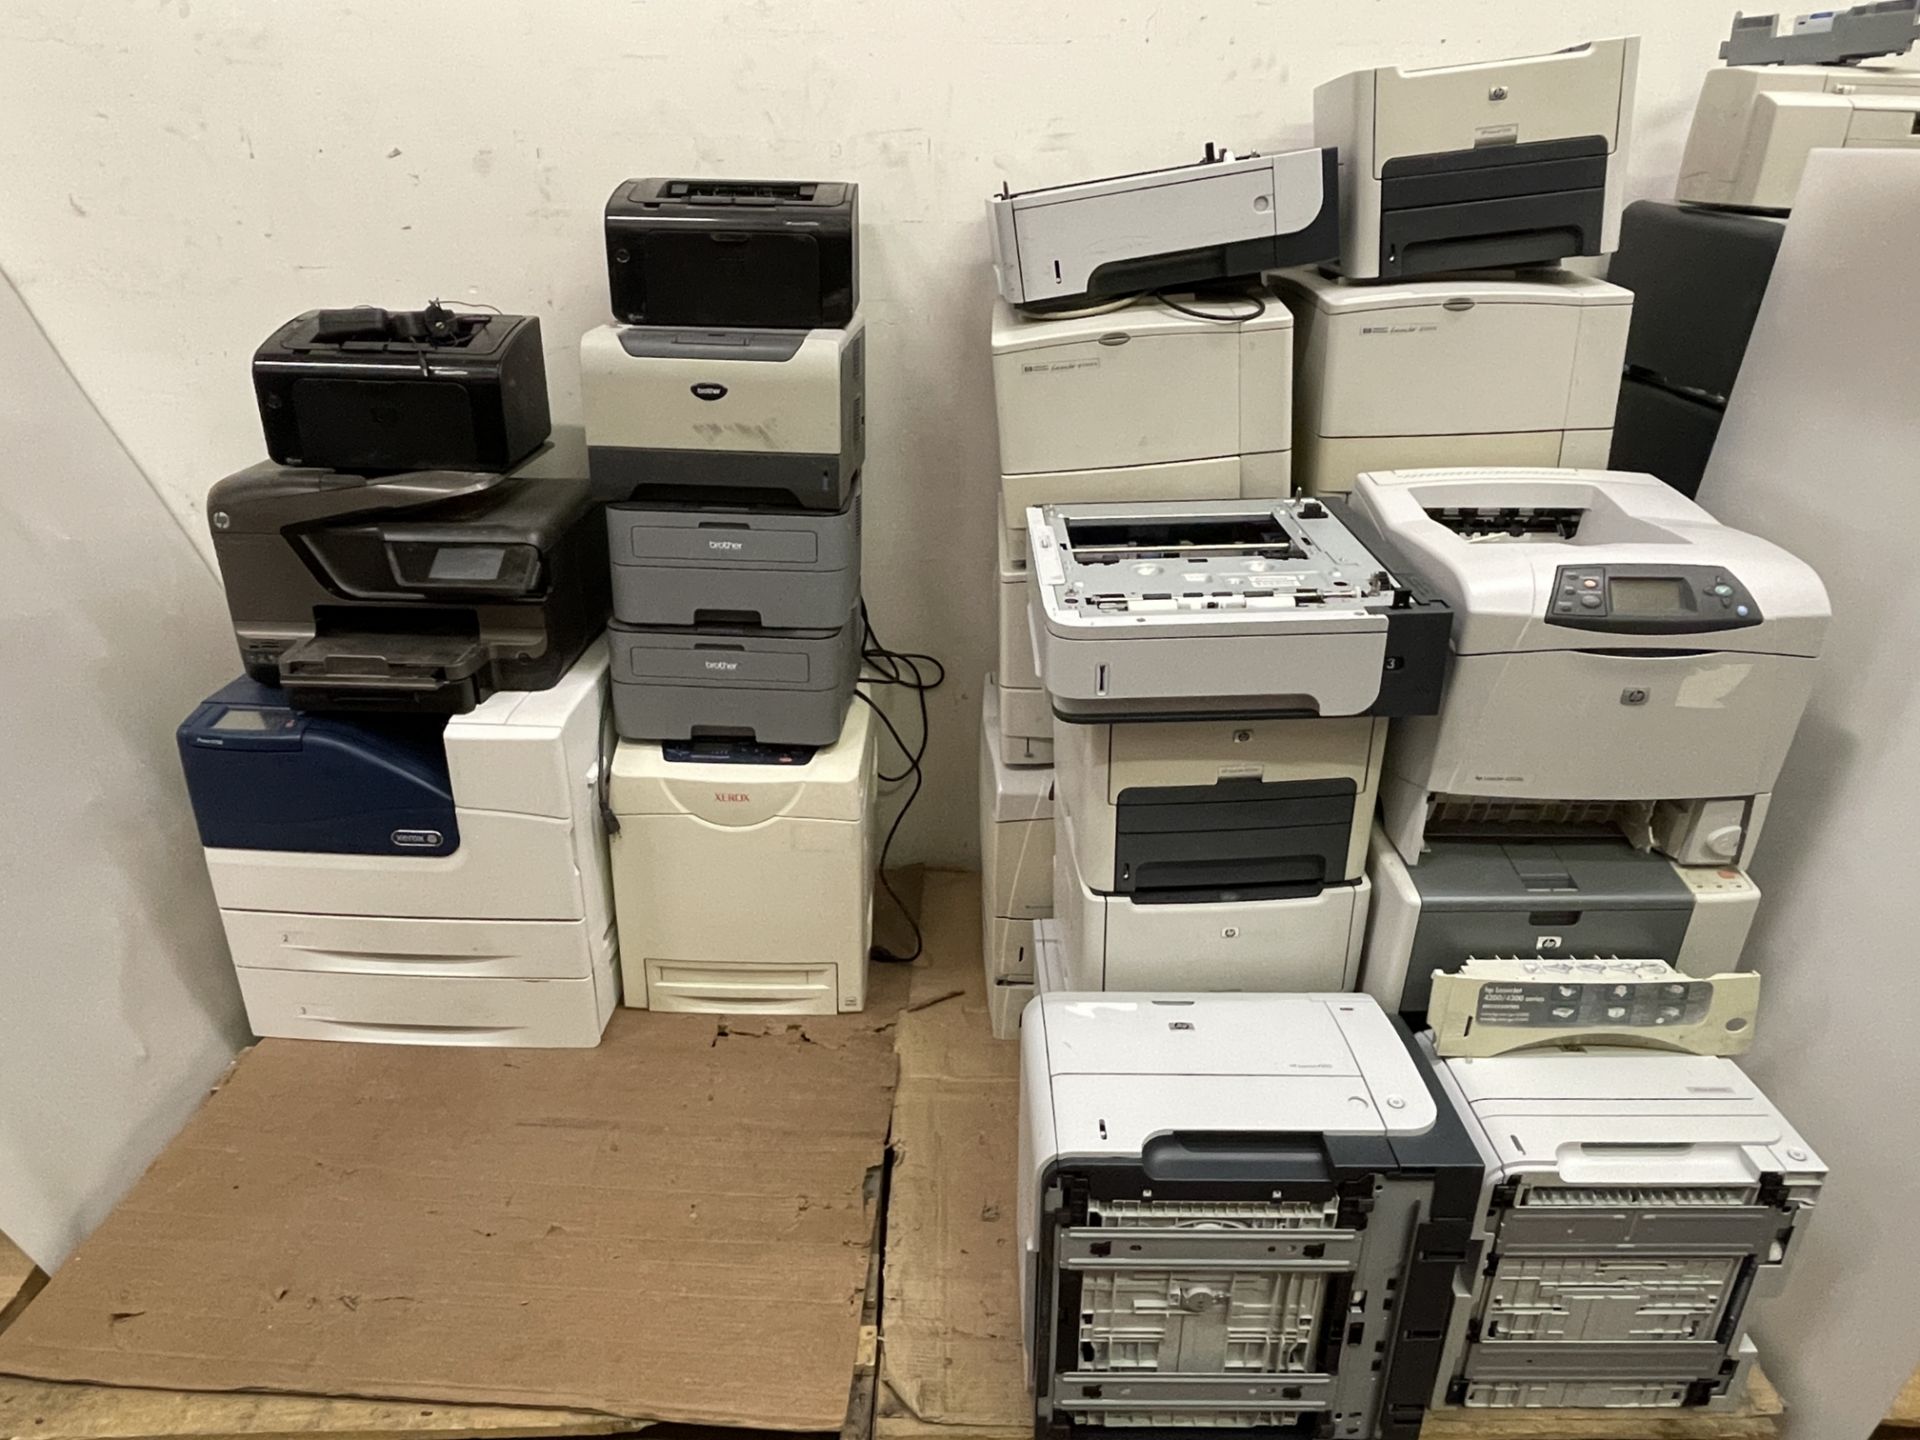 Pallet of 25 Printer and Trays, Including Xerox Phaser 6700, Etc